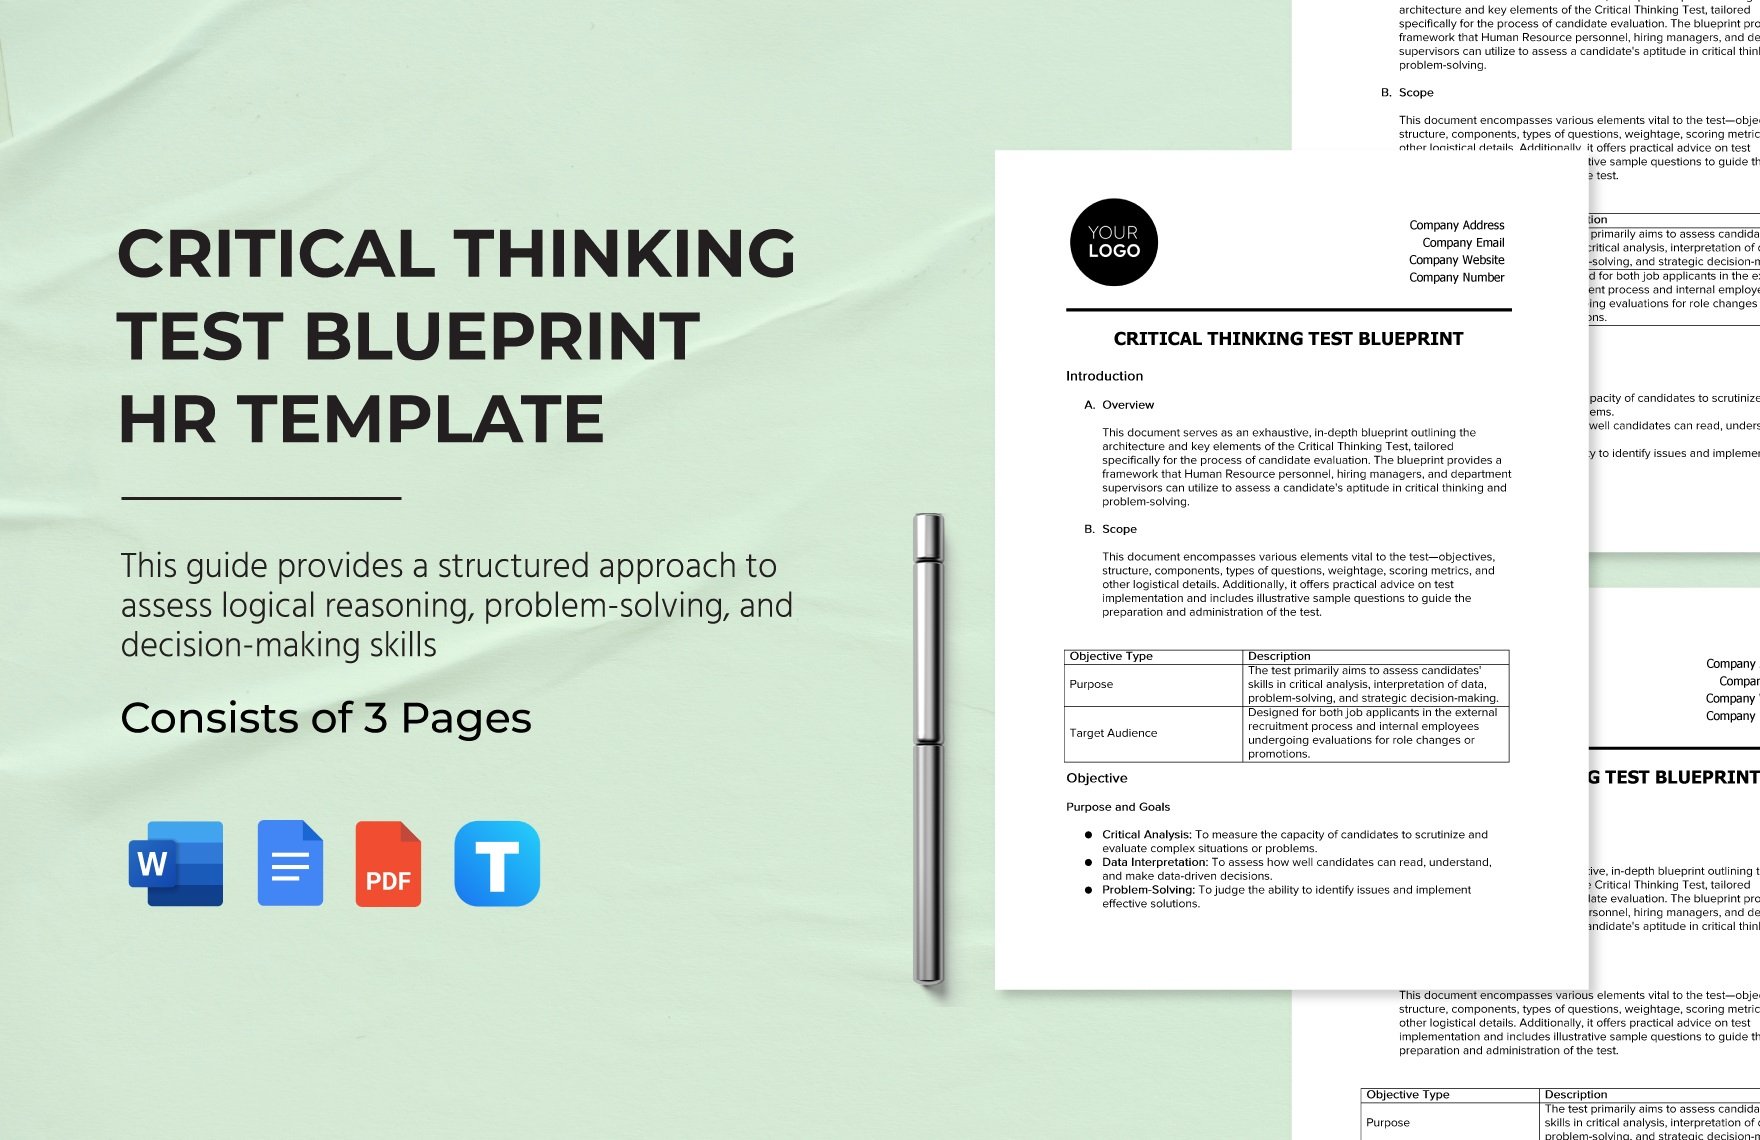 Critical Thinking Test Blueprint HR Template in Word, Google Docs, PDF